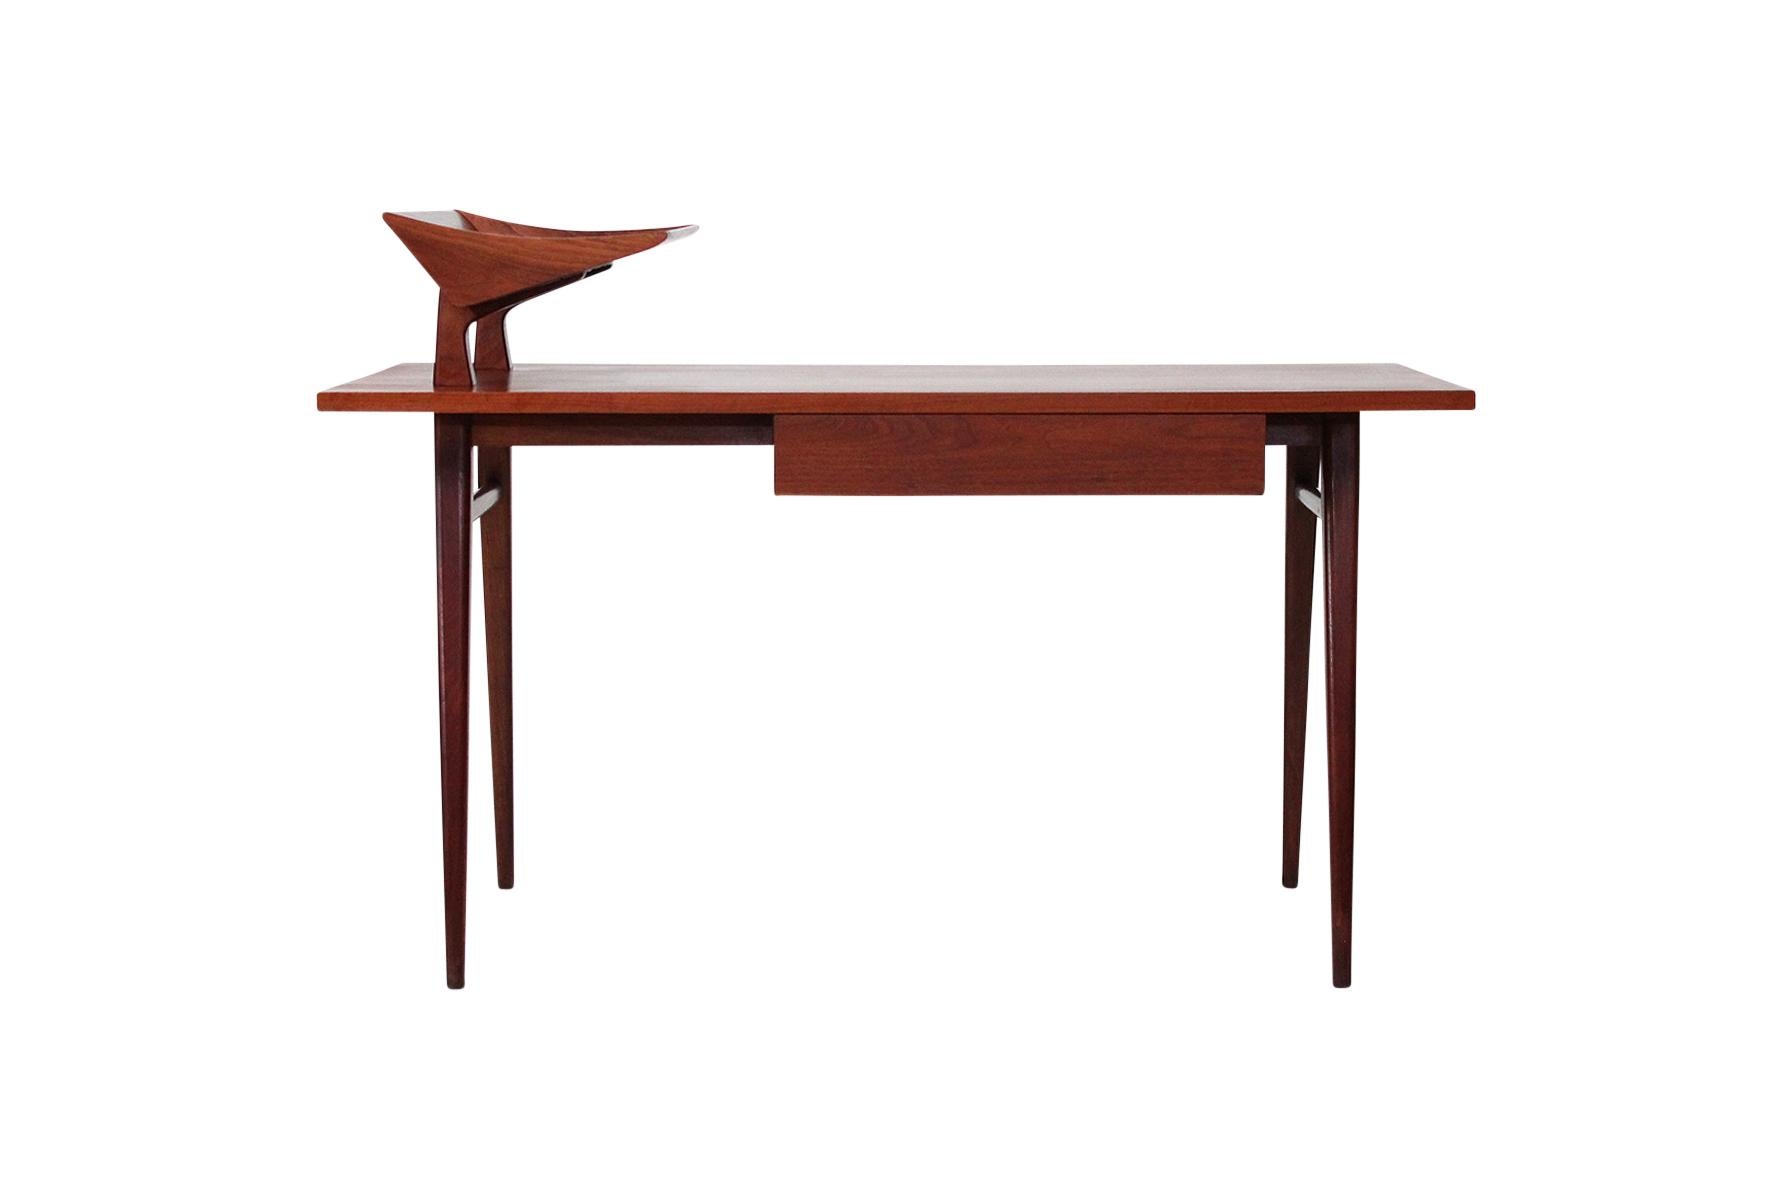 Writing desk designed by Bertha Schaeffer for M. Singer and Sons. Constructed from figured walnut with a sculptural elevated paper tray. Schaeffer began working with Singer and Sons in 1950 and created several pieces for them over an 11 year span.
 